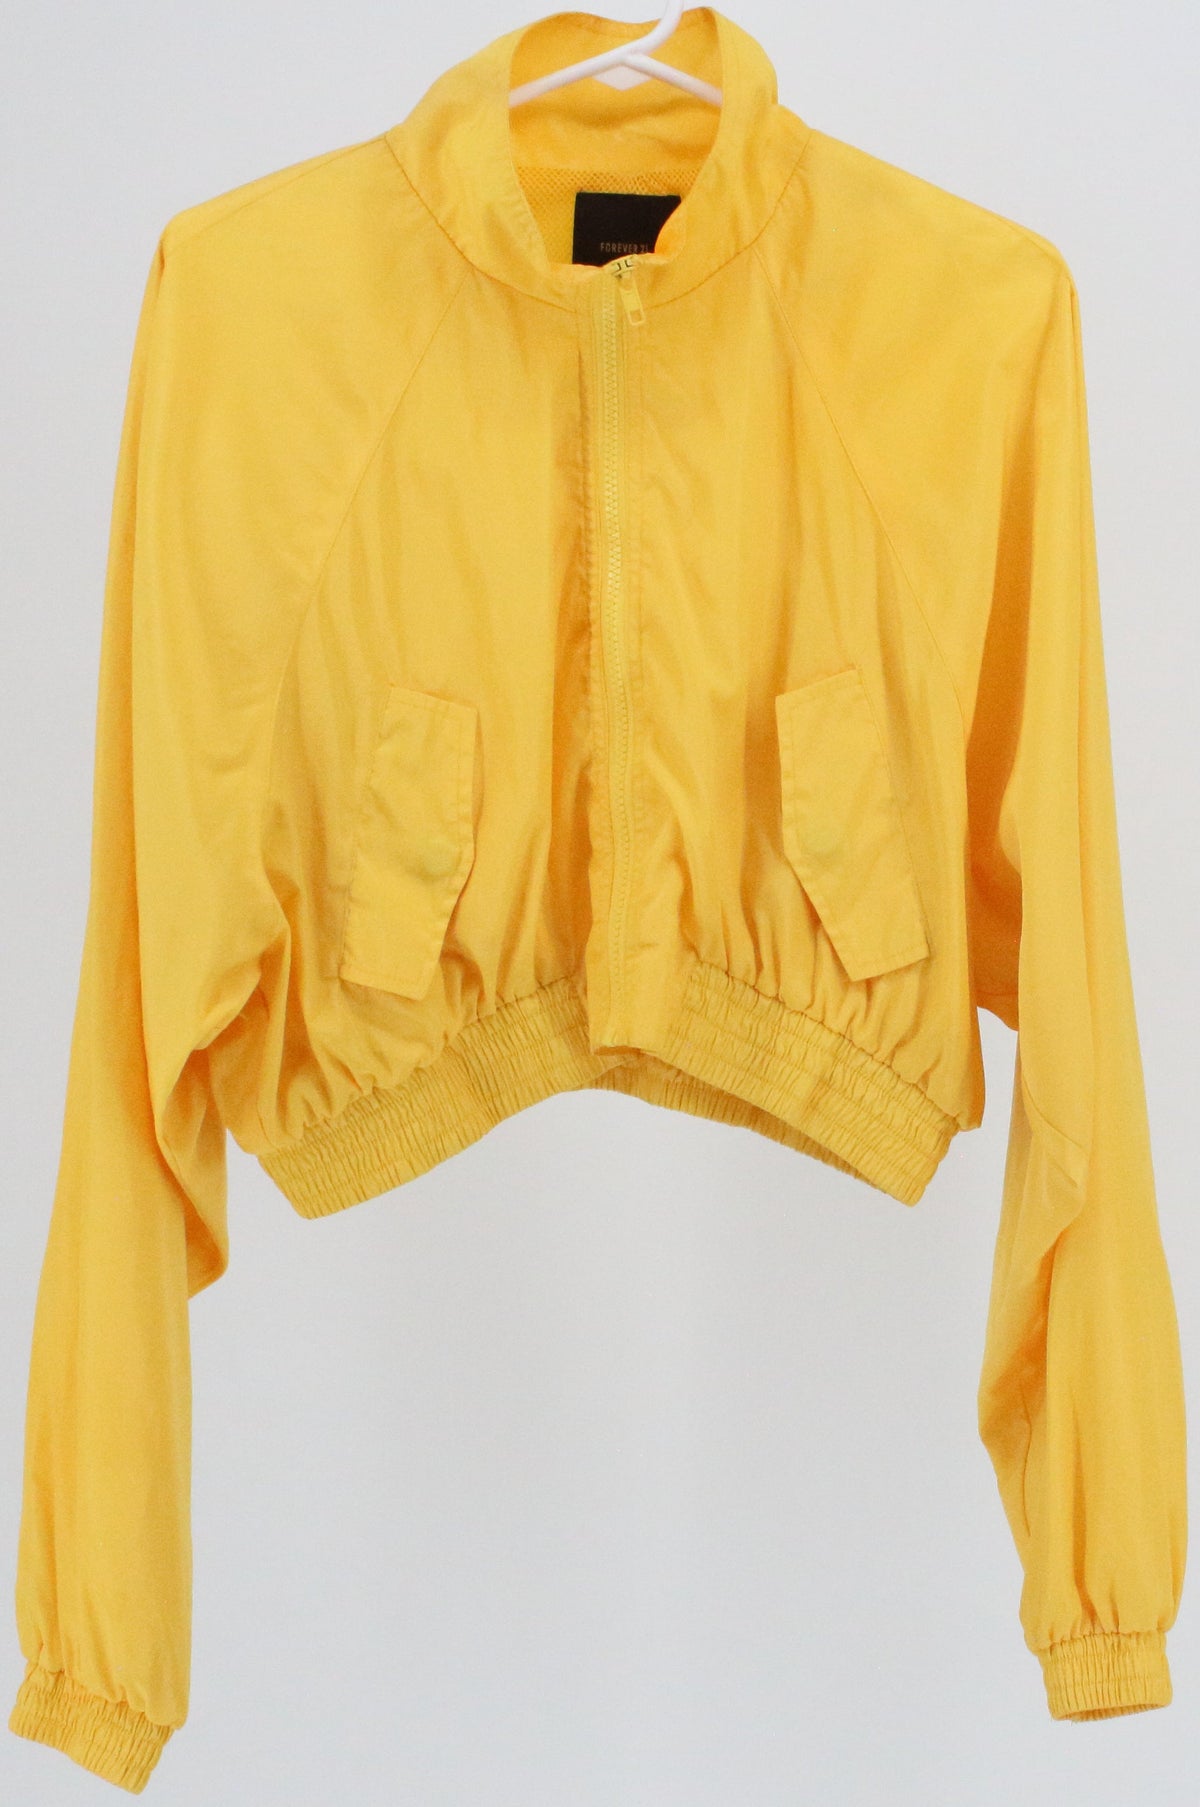 Forever 21 Yellow Cropped Jacket